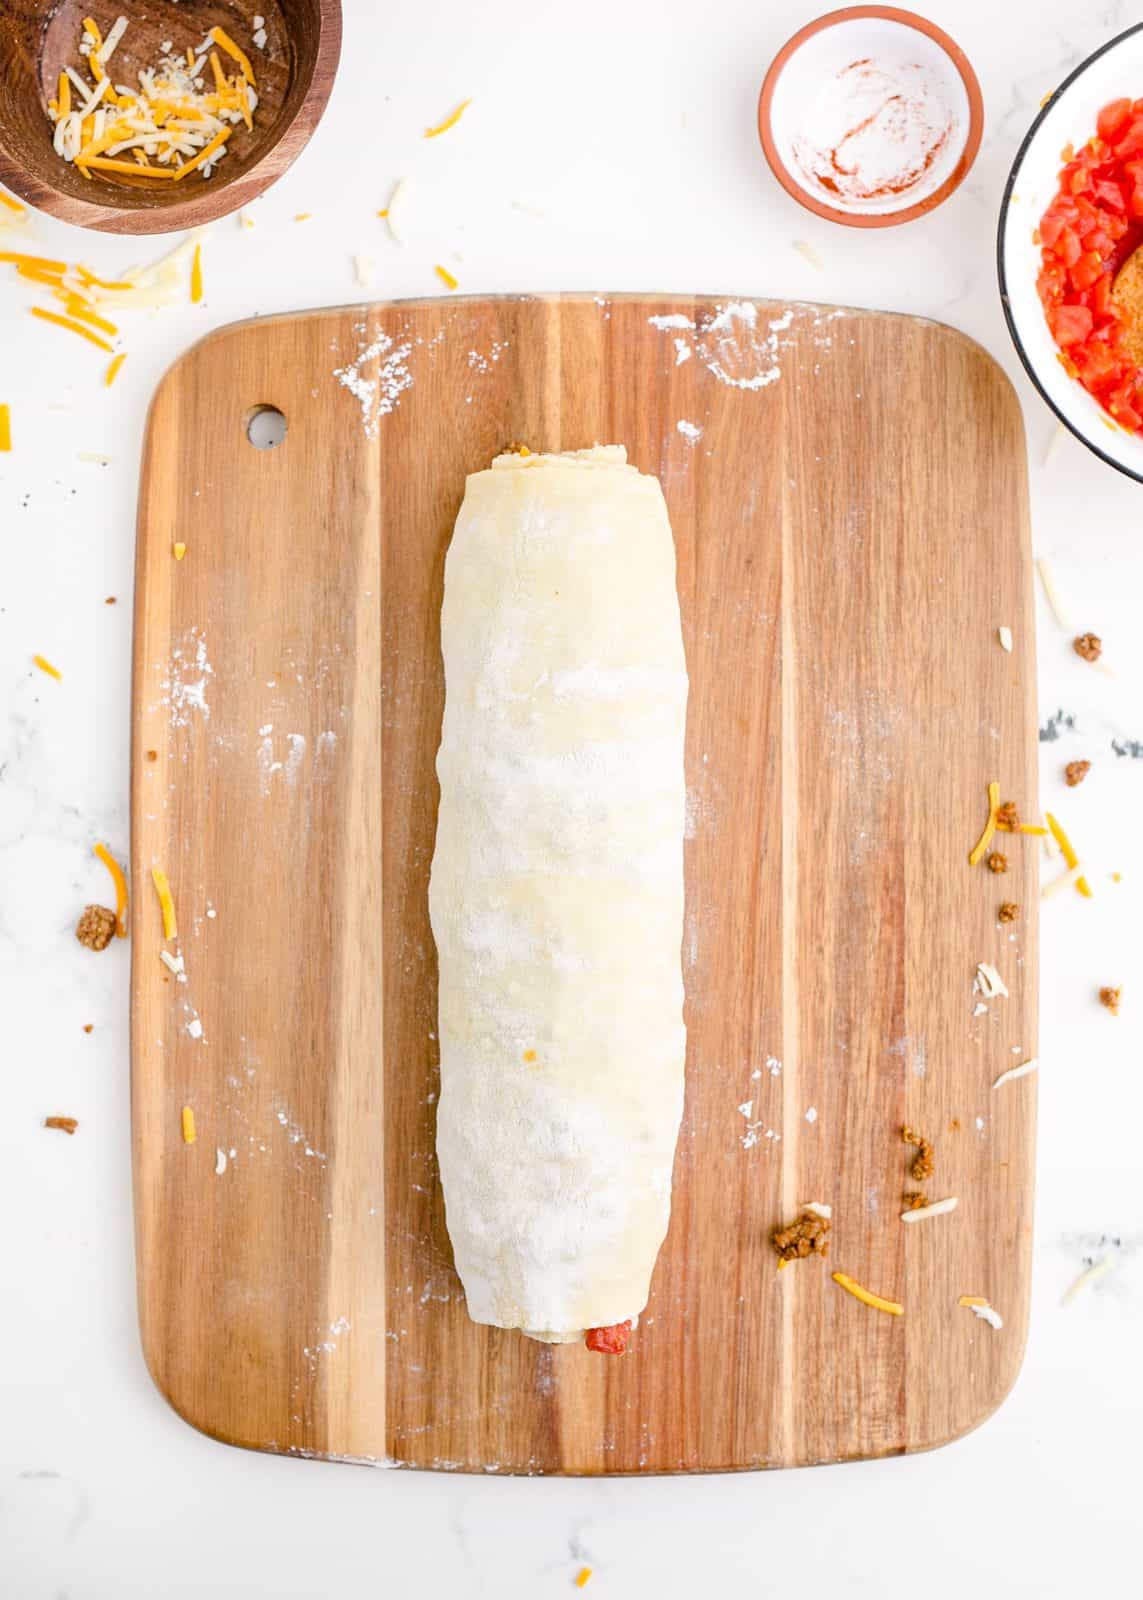 Puff pastry rolled up tightly into log.